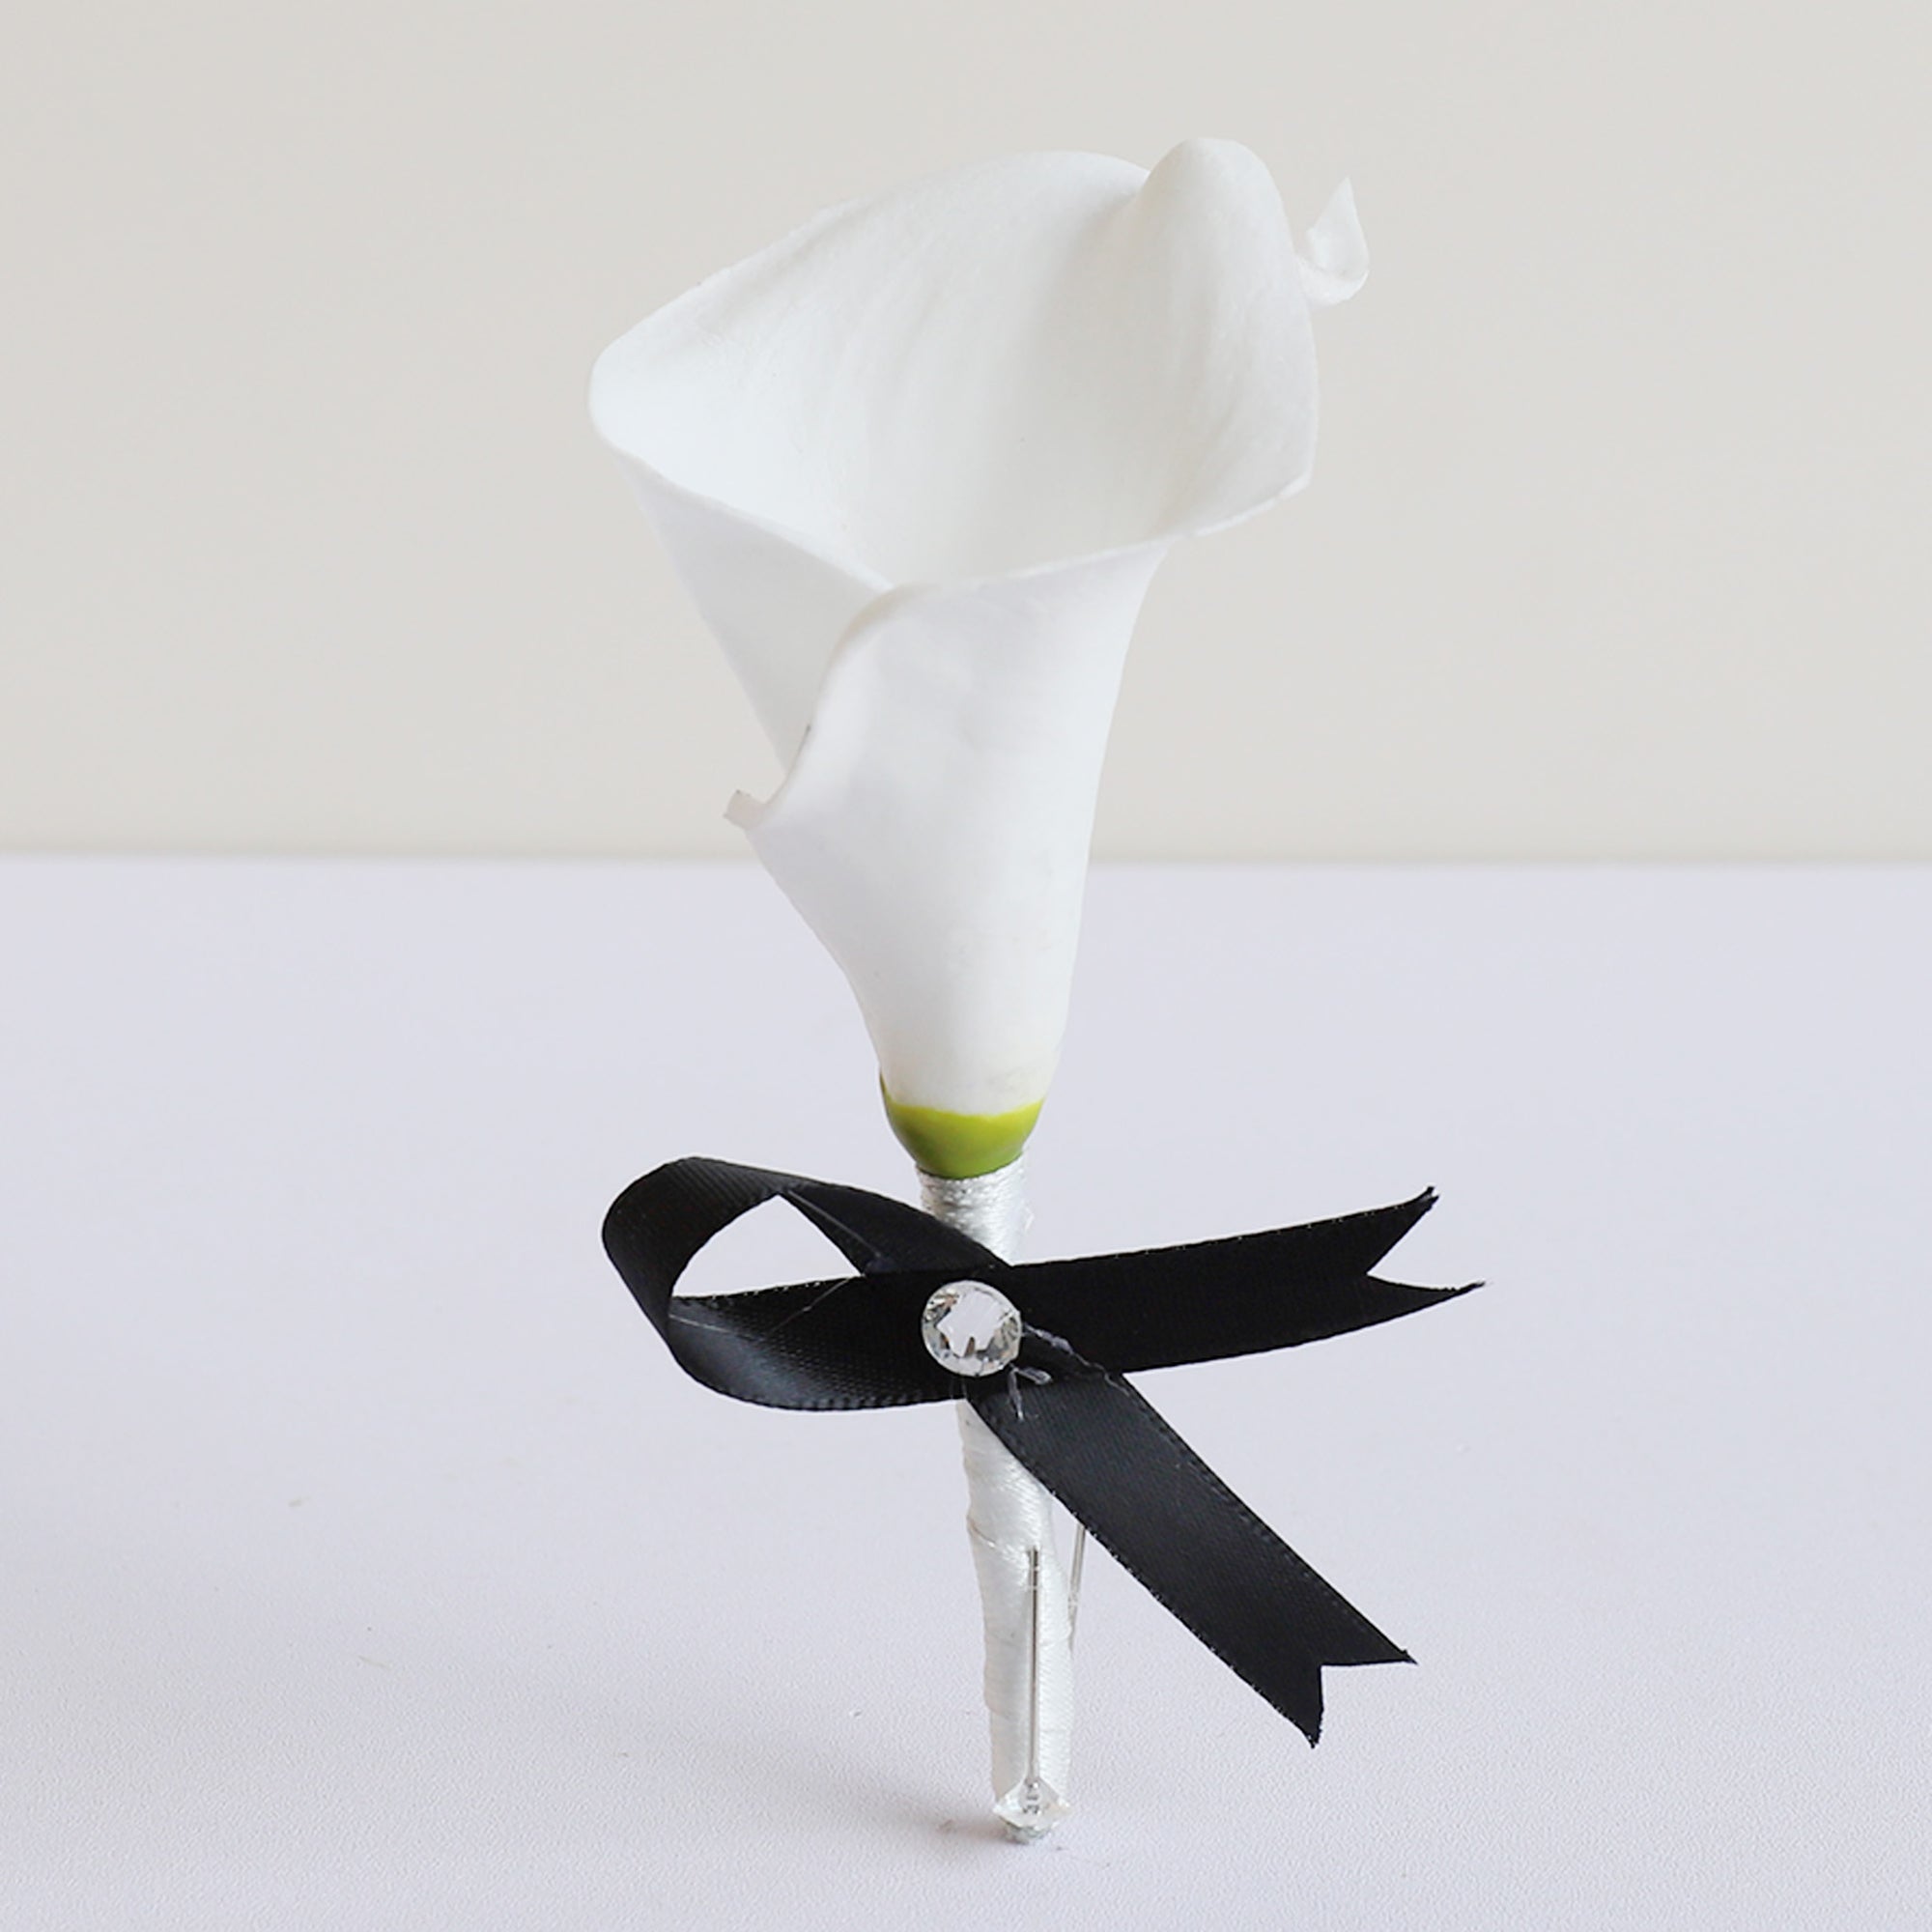 White Calla Lily Bouquets Boutonnieres Corsages